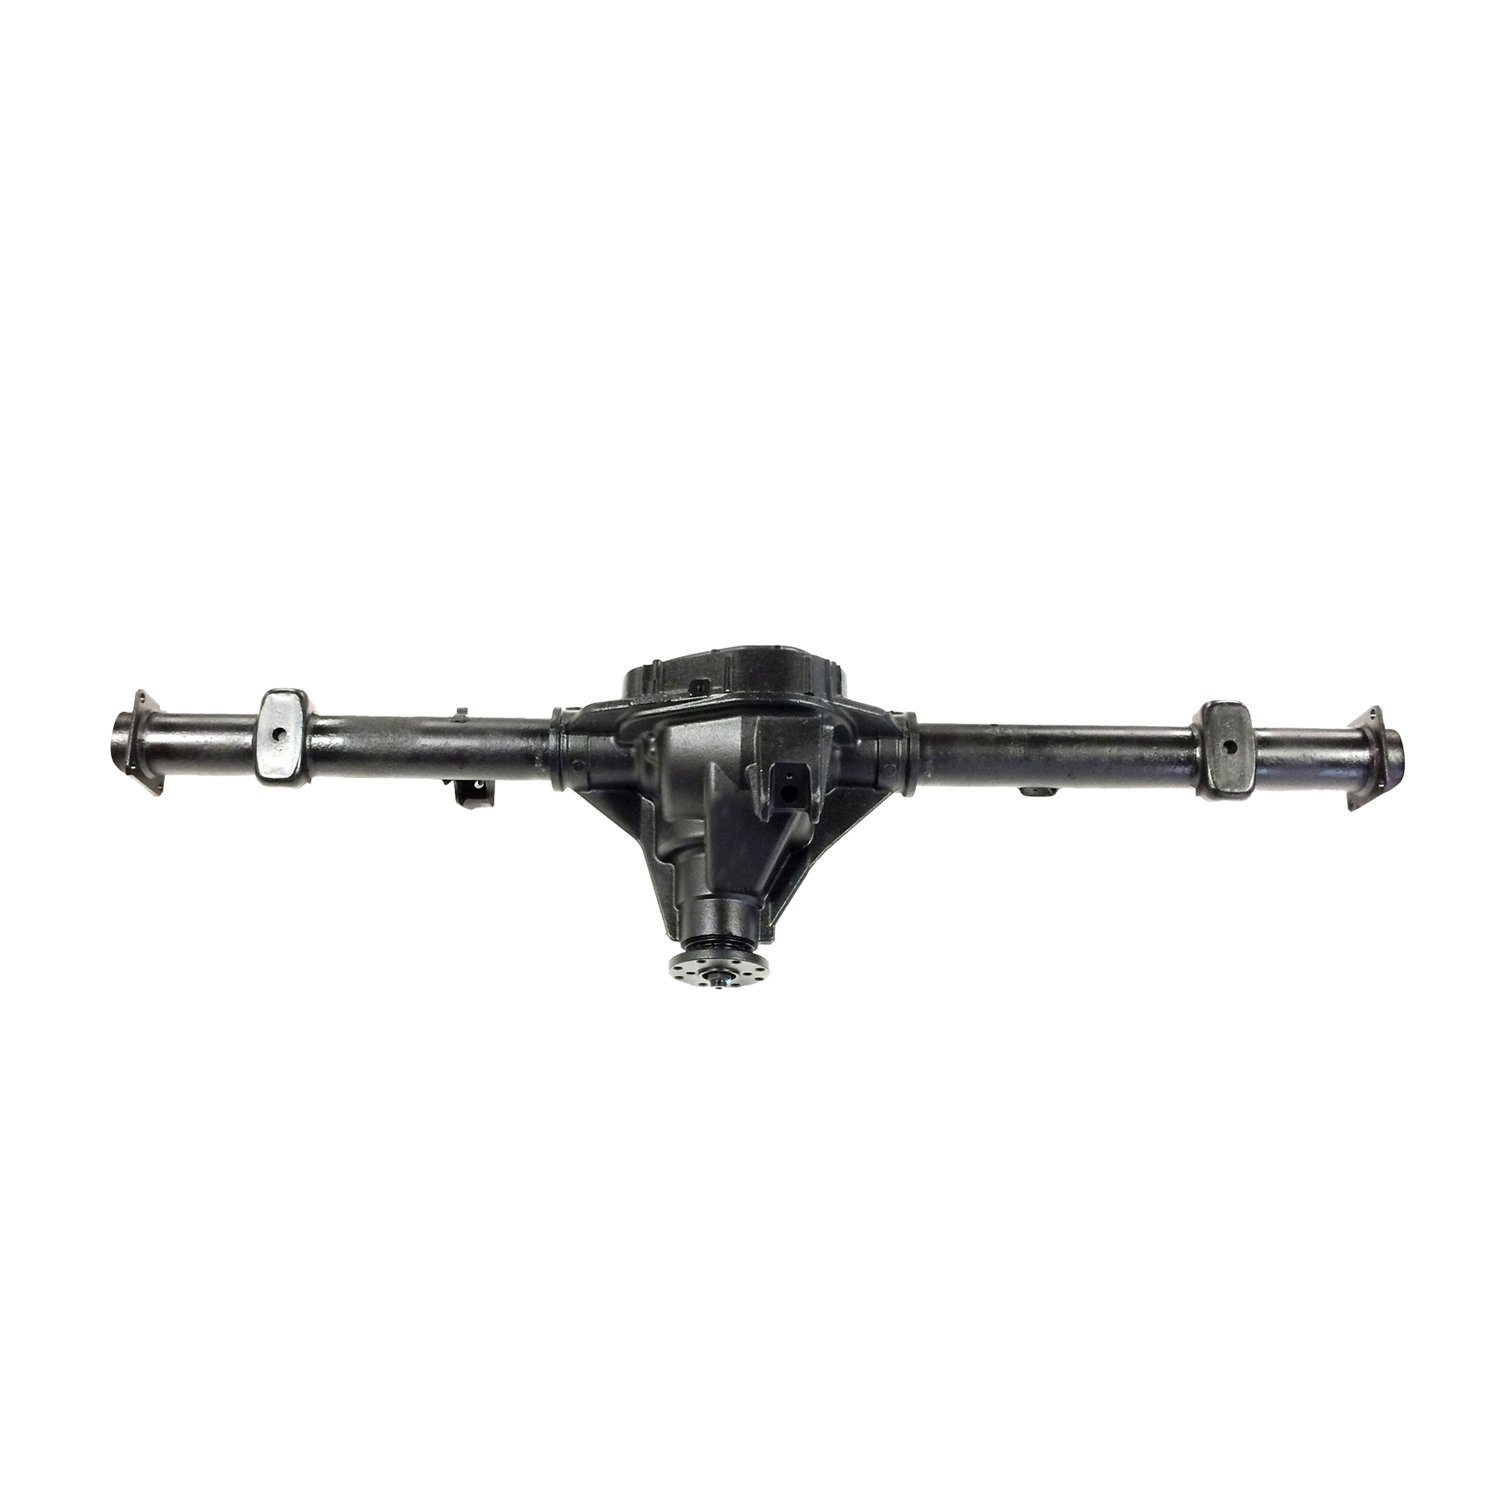 Remanufactured Axle Assy for 9.75" 99-00 Expedition 3.31, 12mm Stud, Posi LSD *Check Tag*